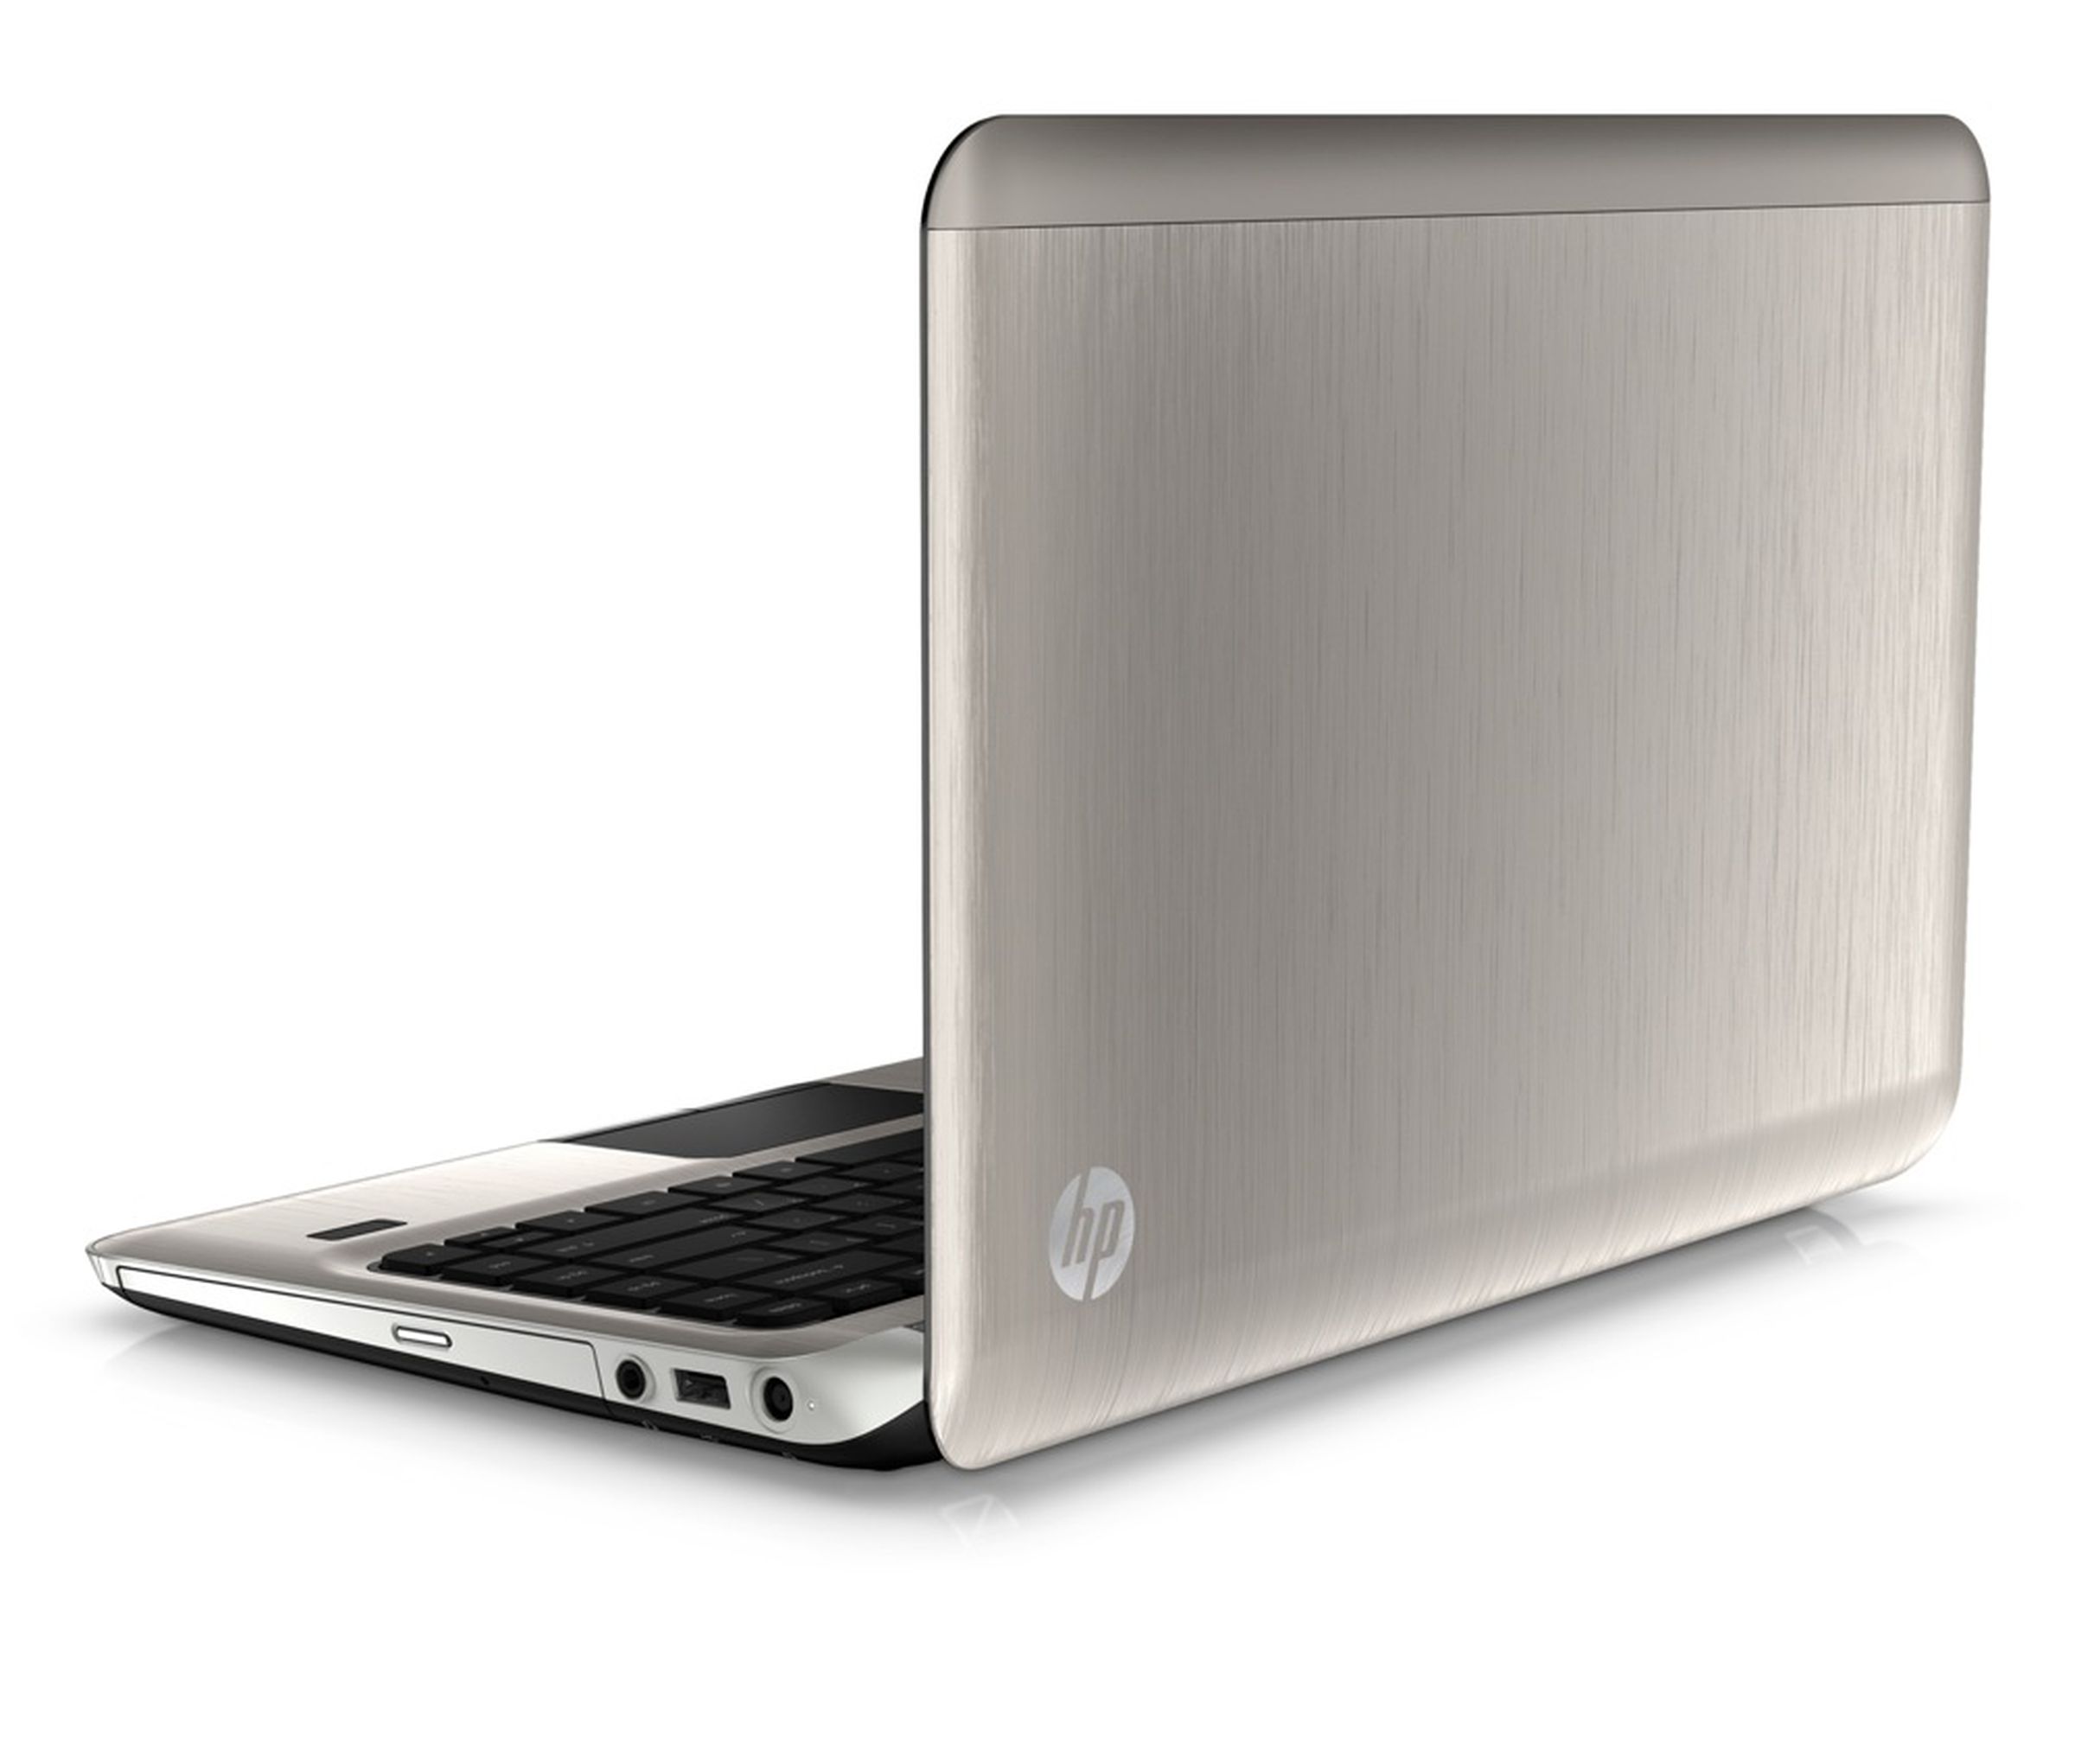 HP Pavilion dm4 and HP X7000 Touch Mouse press shots